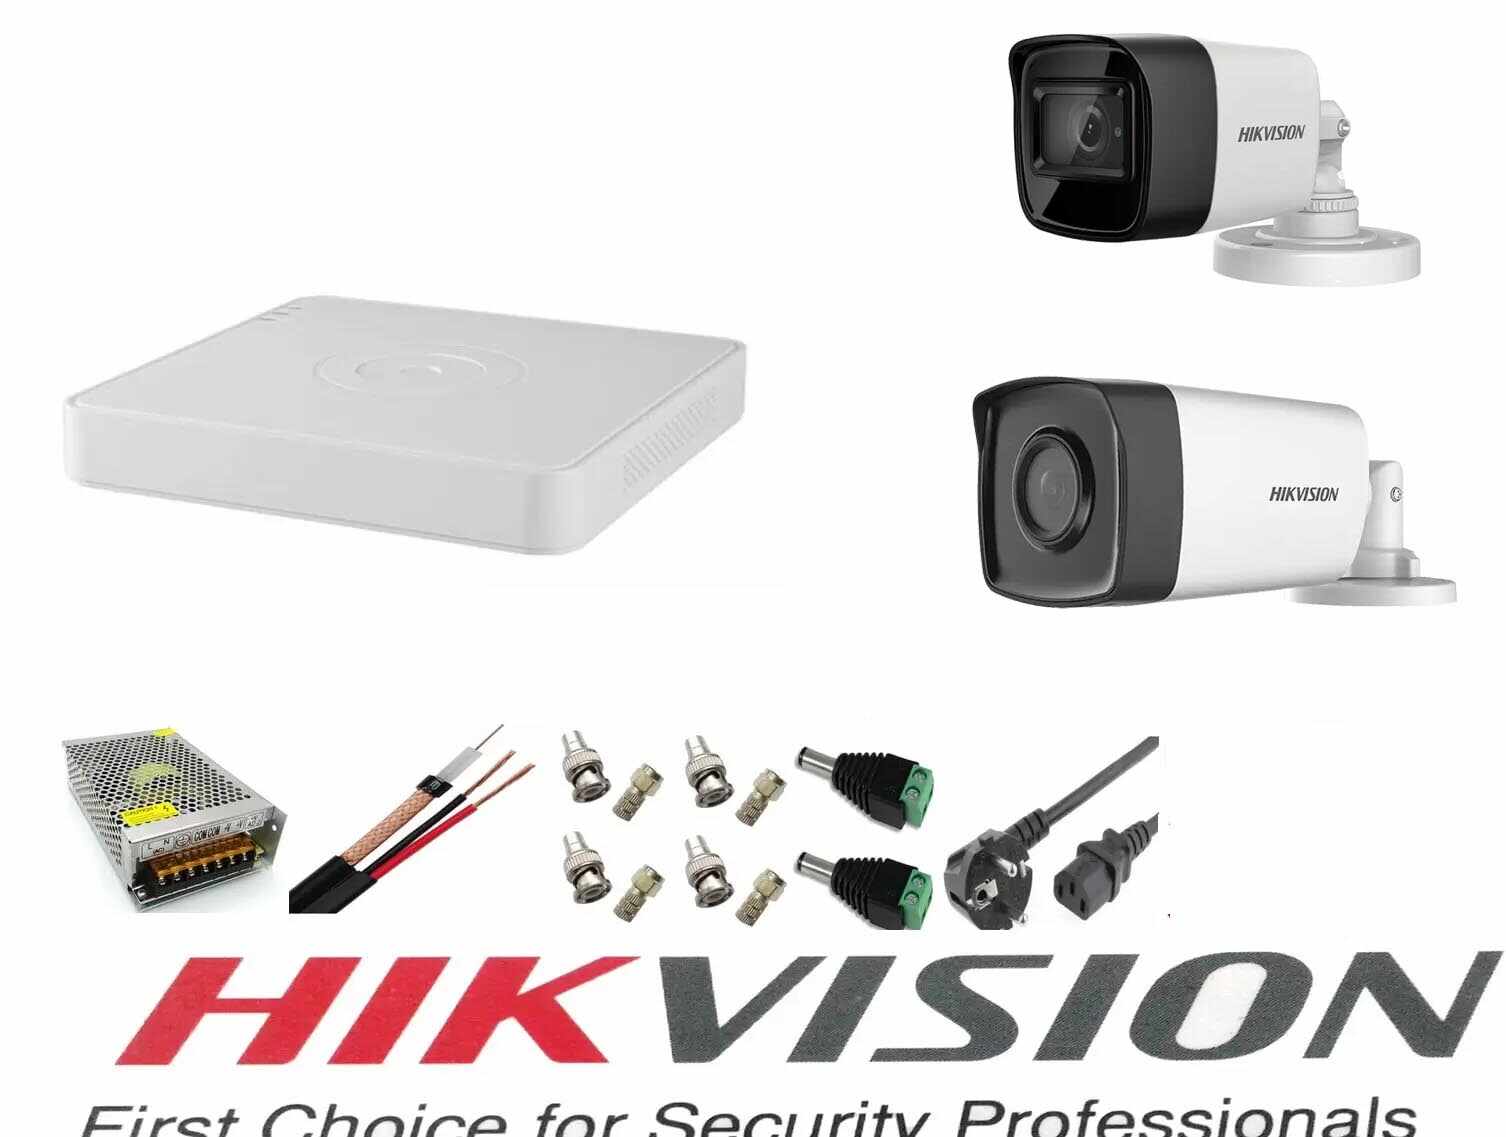 Sistem supraveghere video Hikvision 2 camere 5MP Turbo HD, IR80m si IR40m, DVR Hikvision 4 canale, full accesorii